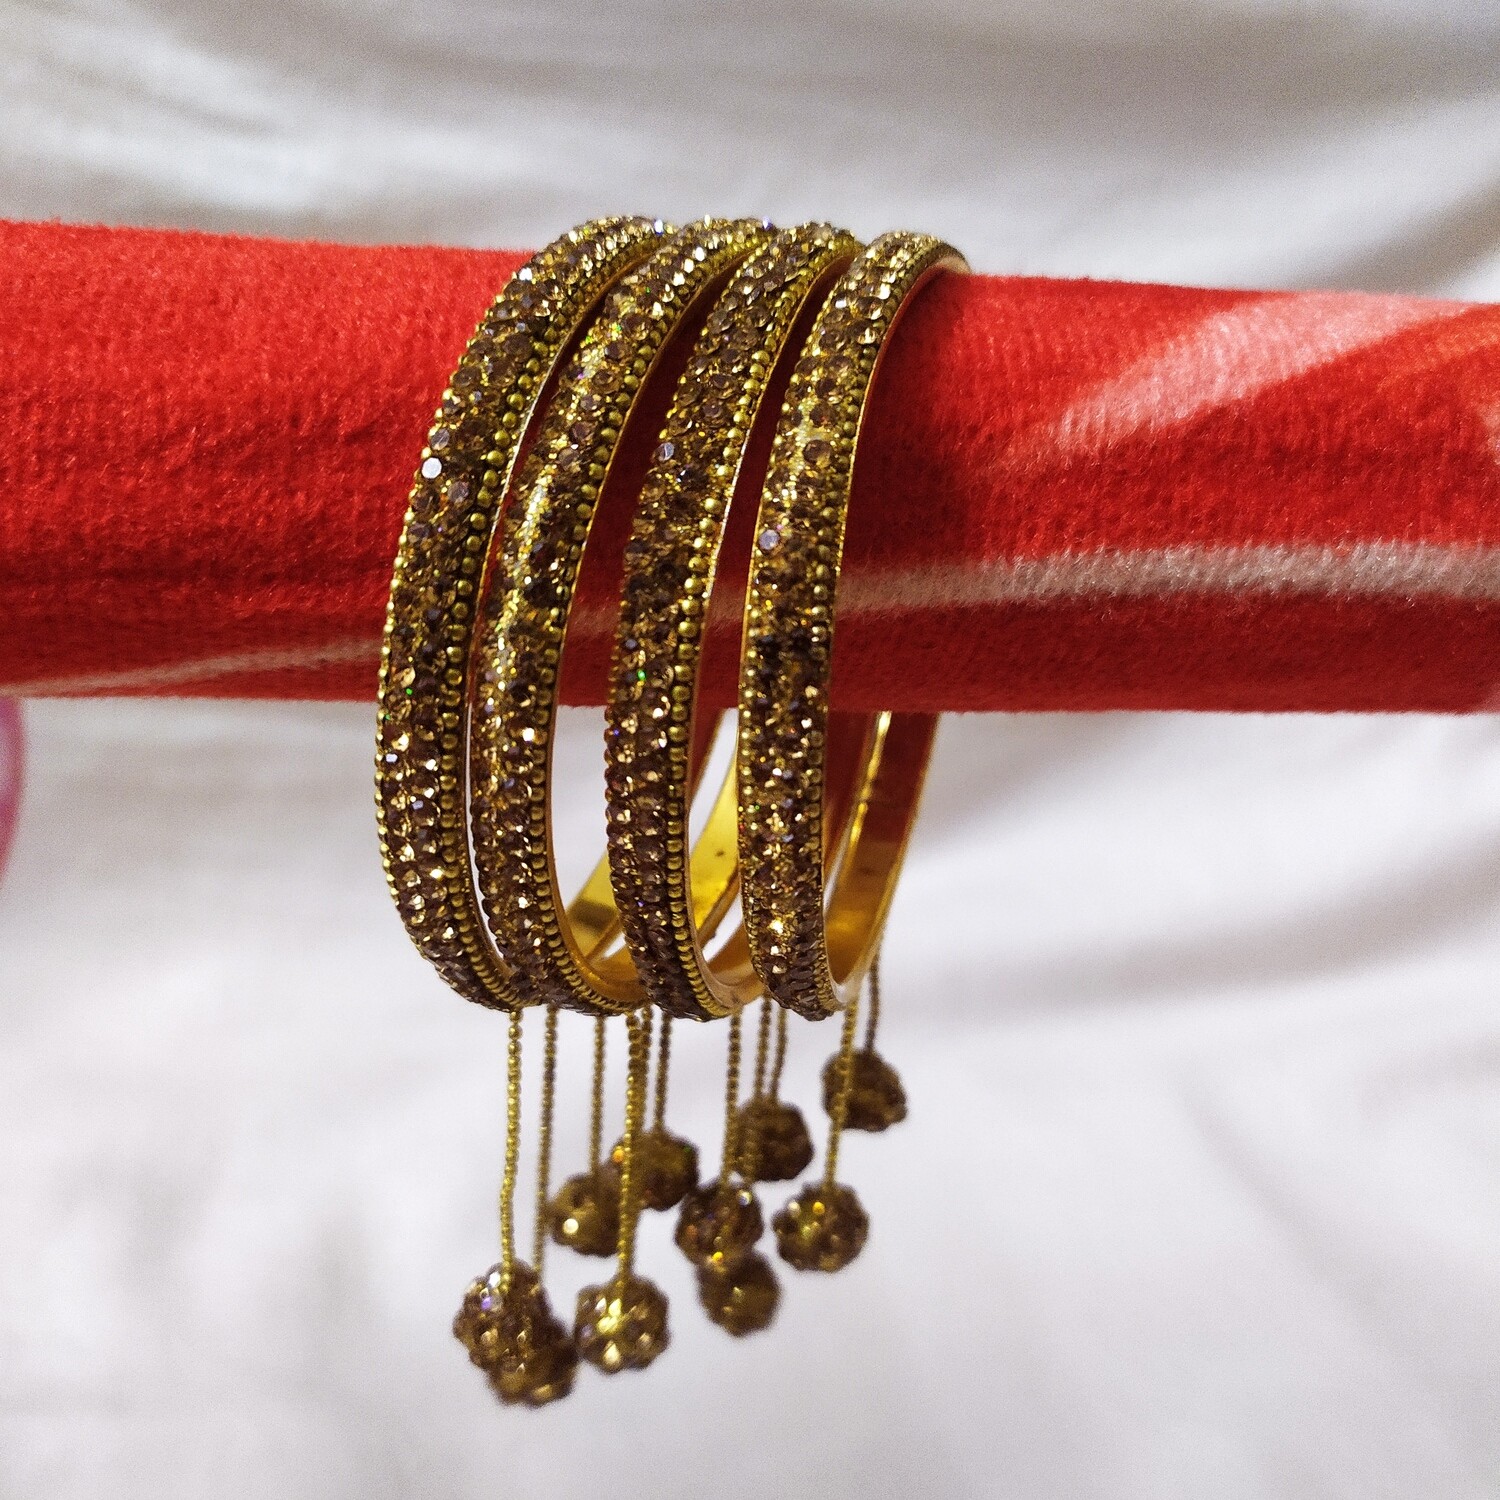 Gold Colour Bangles with Hangings Size: 2-6